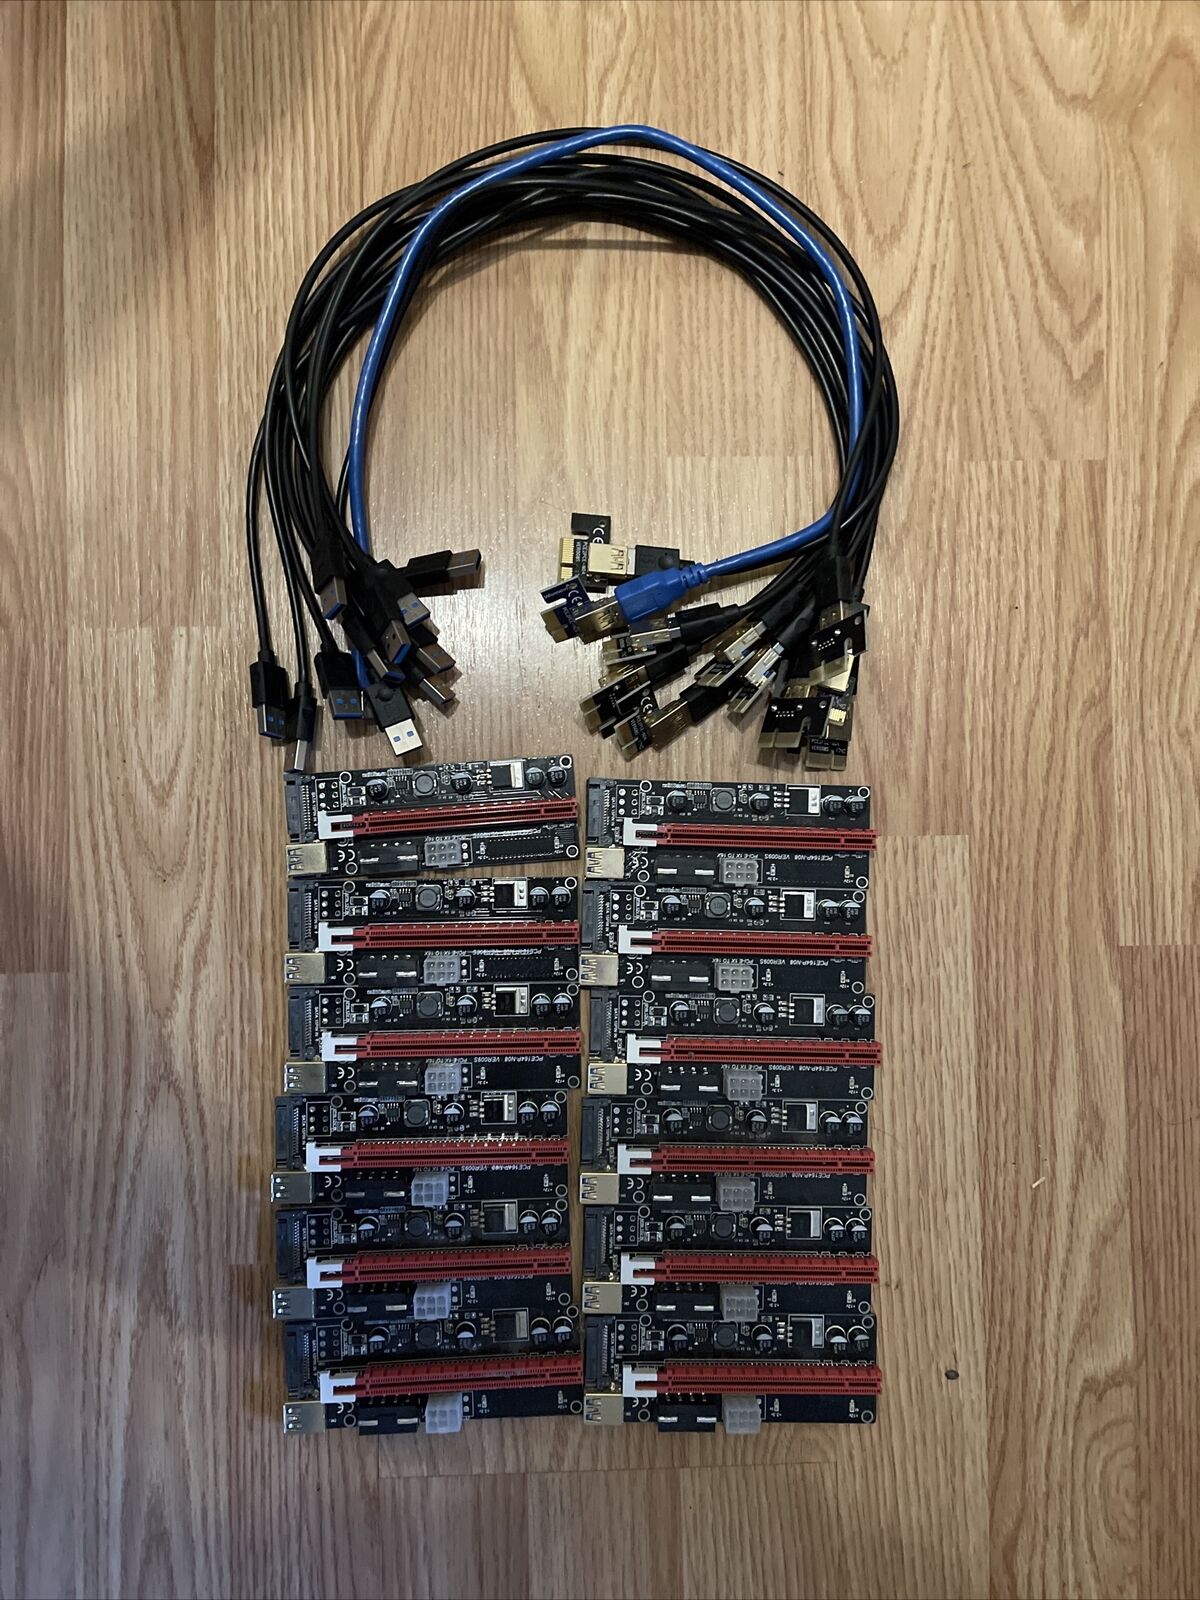 12Pack VER009S PCI-E Riser Card PCIe 1x to 16x USB 3.0 Data Cable Bitcoin Mining